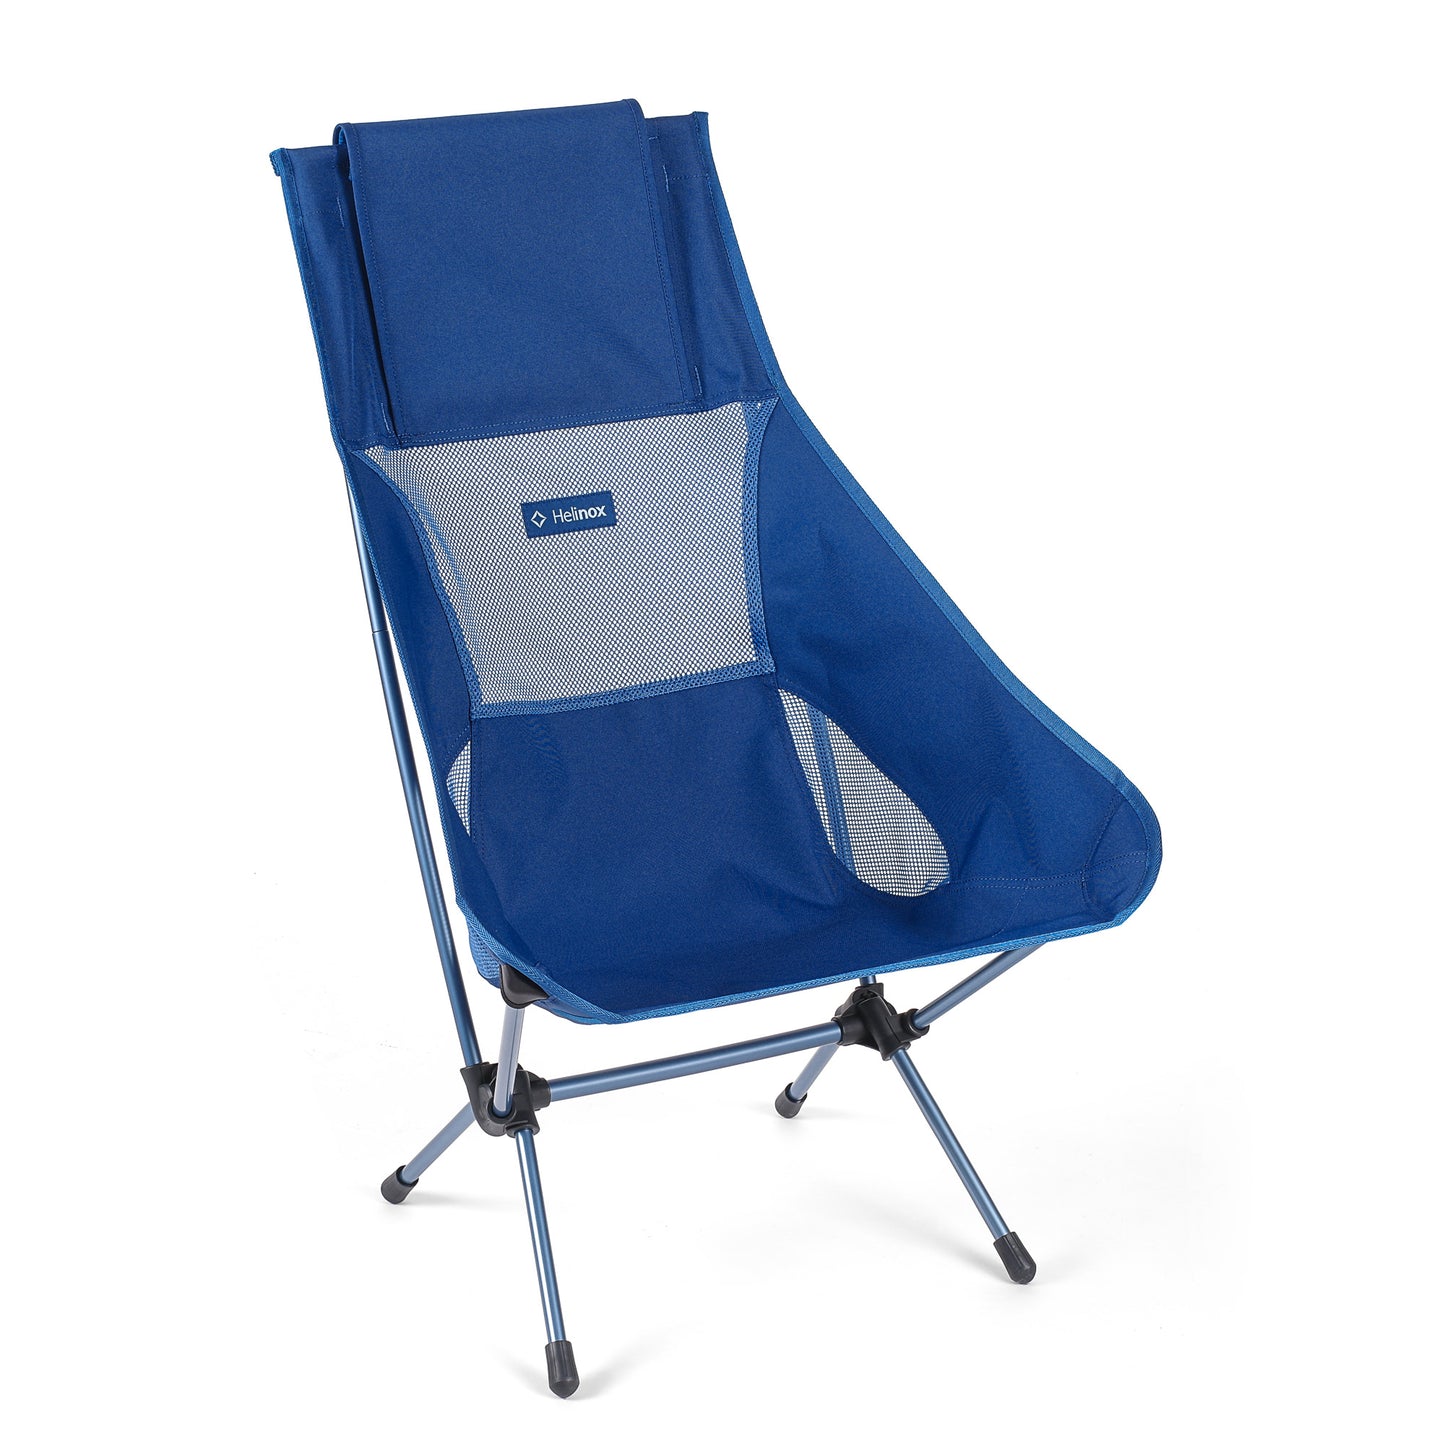 Chair Two - Blue Block